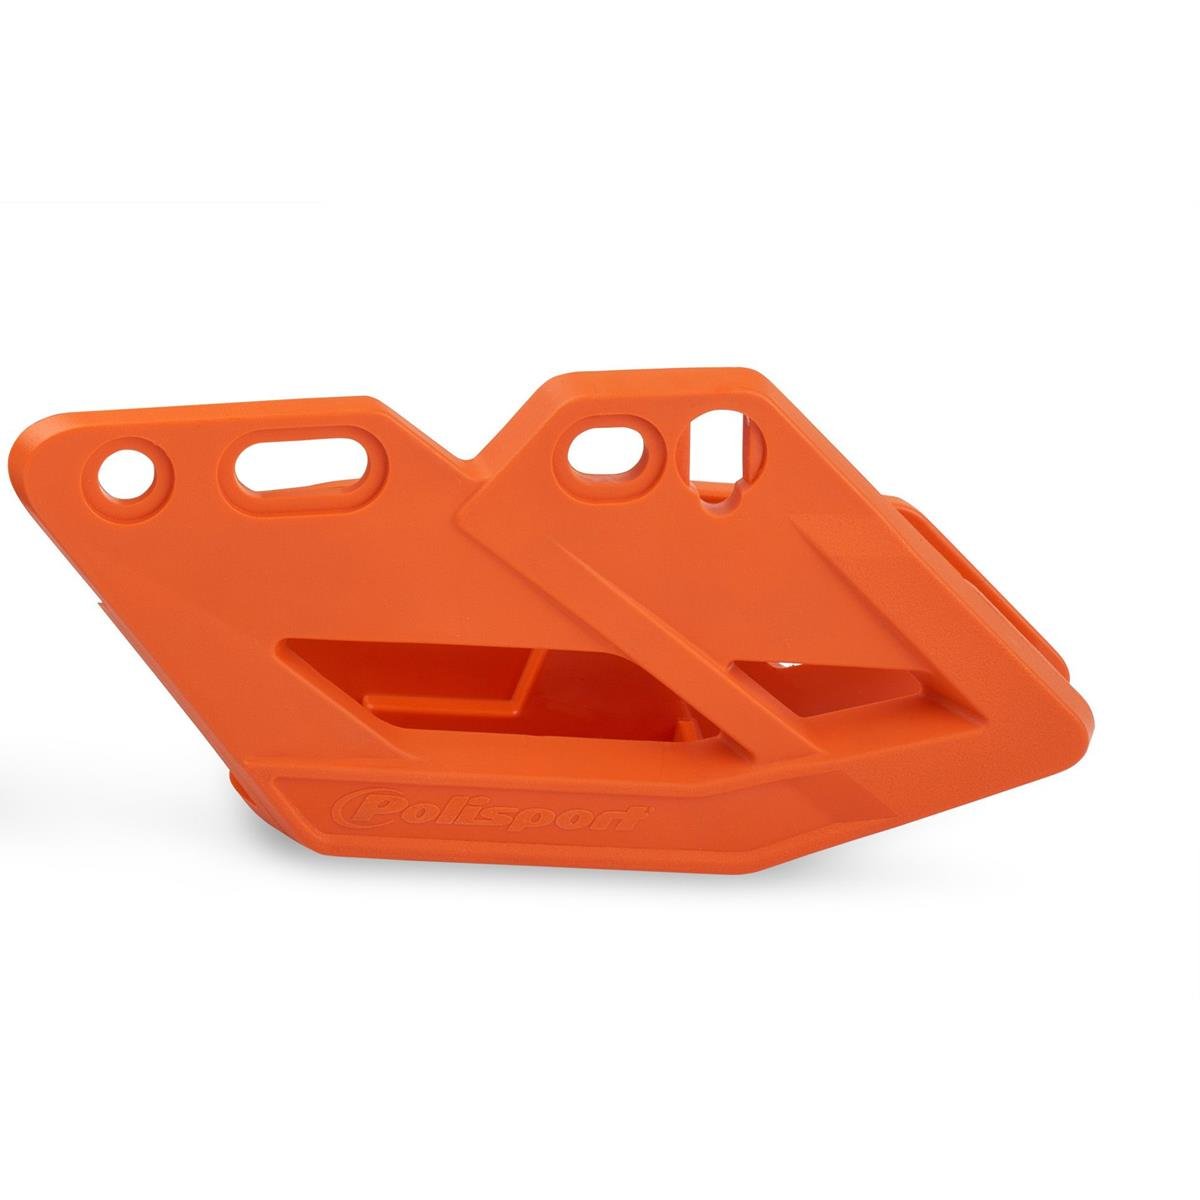 Polisport Chain Guide Performance Replacement, Orange